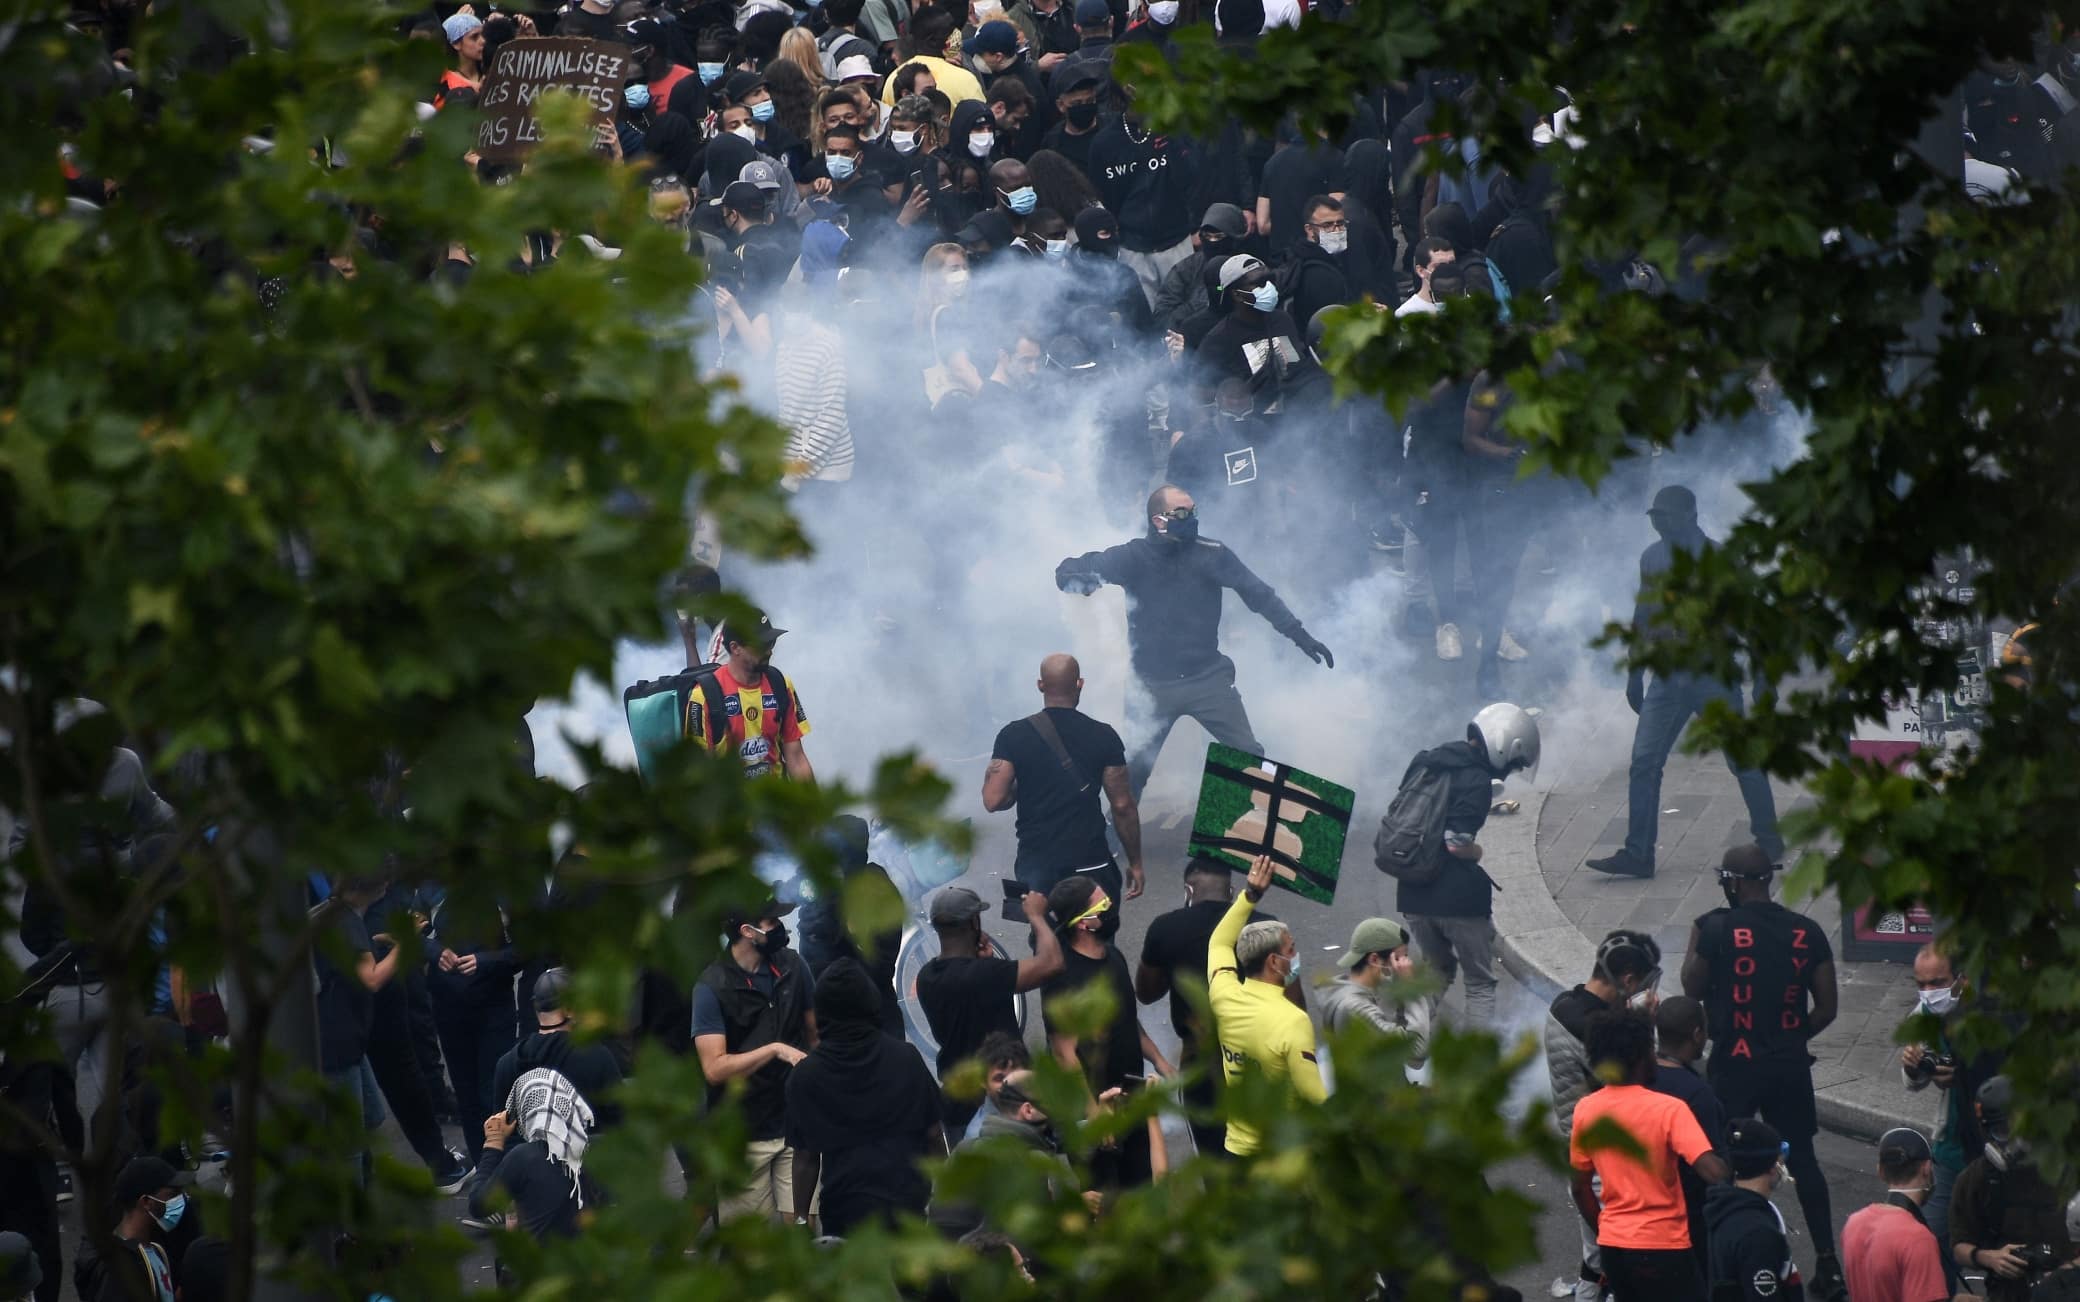 People throw back tear gas canisters at French riot police forces during a rally as part of the 'Black Lives Matter' worldwide protests against racism and police brutality, on Place de la Republique in Paris on June 13, 2020. - A wave of global protests in the wake of US George Floyd's fatal arrest magnified attention on the 2016 death in French police custody of Adama Traore, a 24-year-old black man, and renewed controversy over claims of racism and brutality within the force. (Photo by Anne-Christine POUJOULAT / AFP) (Photo by ANNE-CHRISTINE POUJOULAT/AFP via Getty Images)